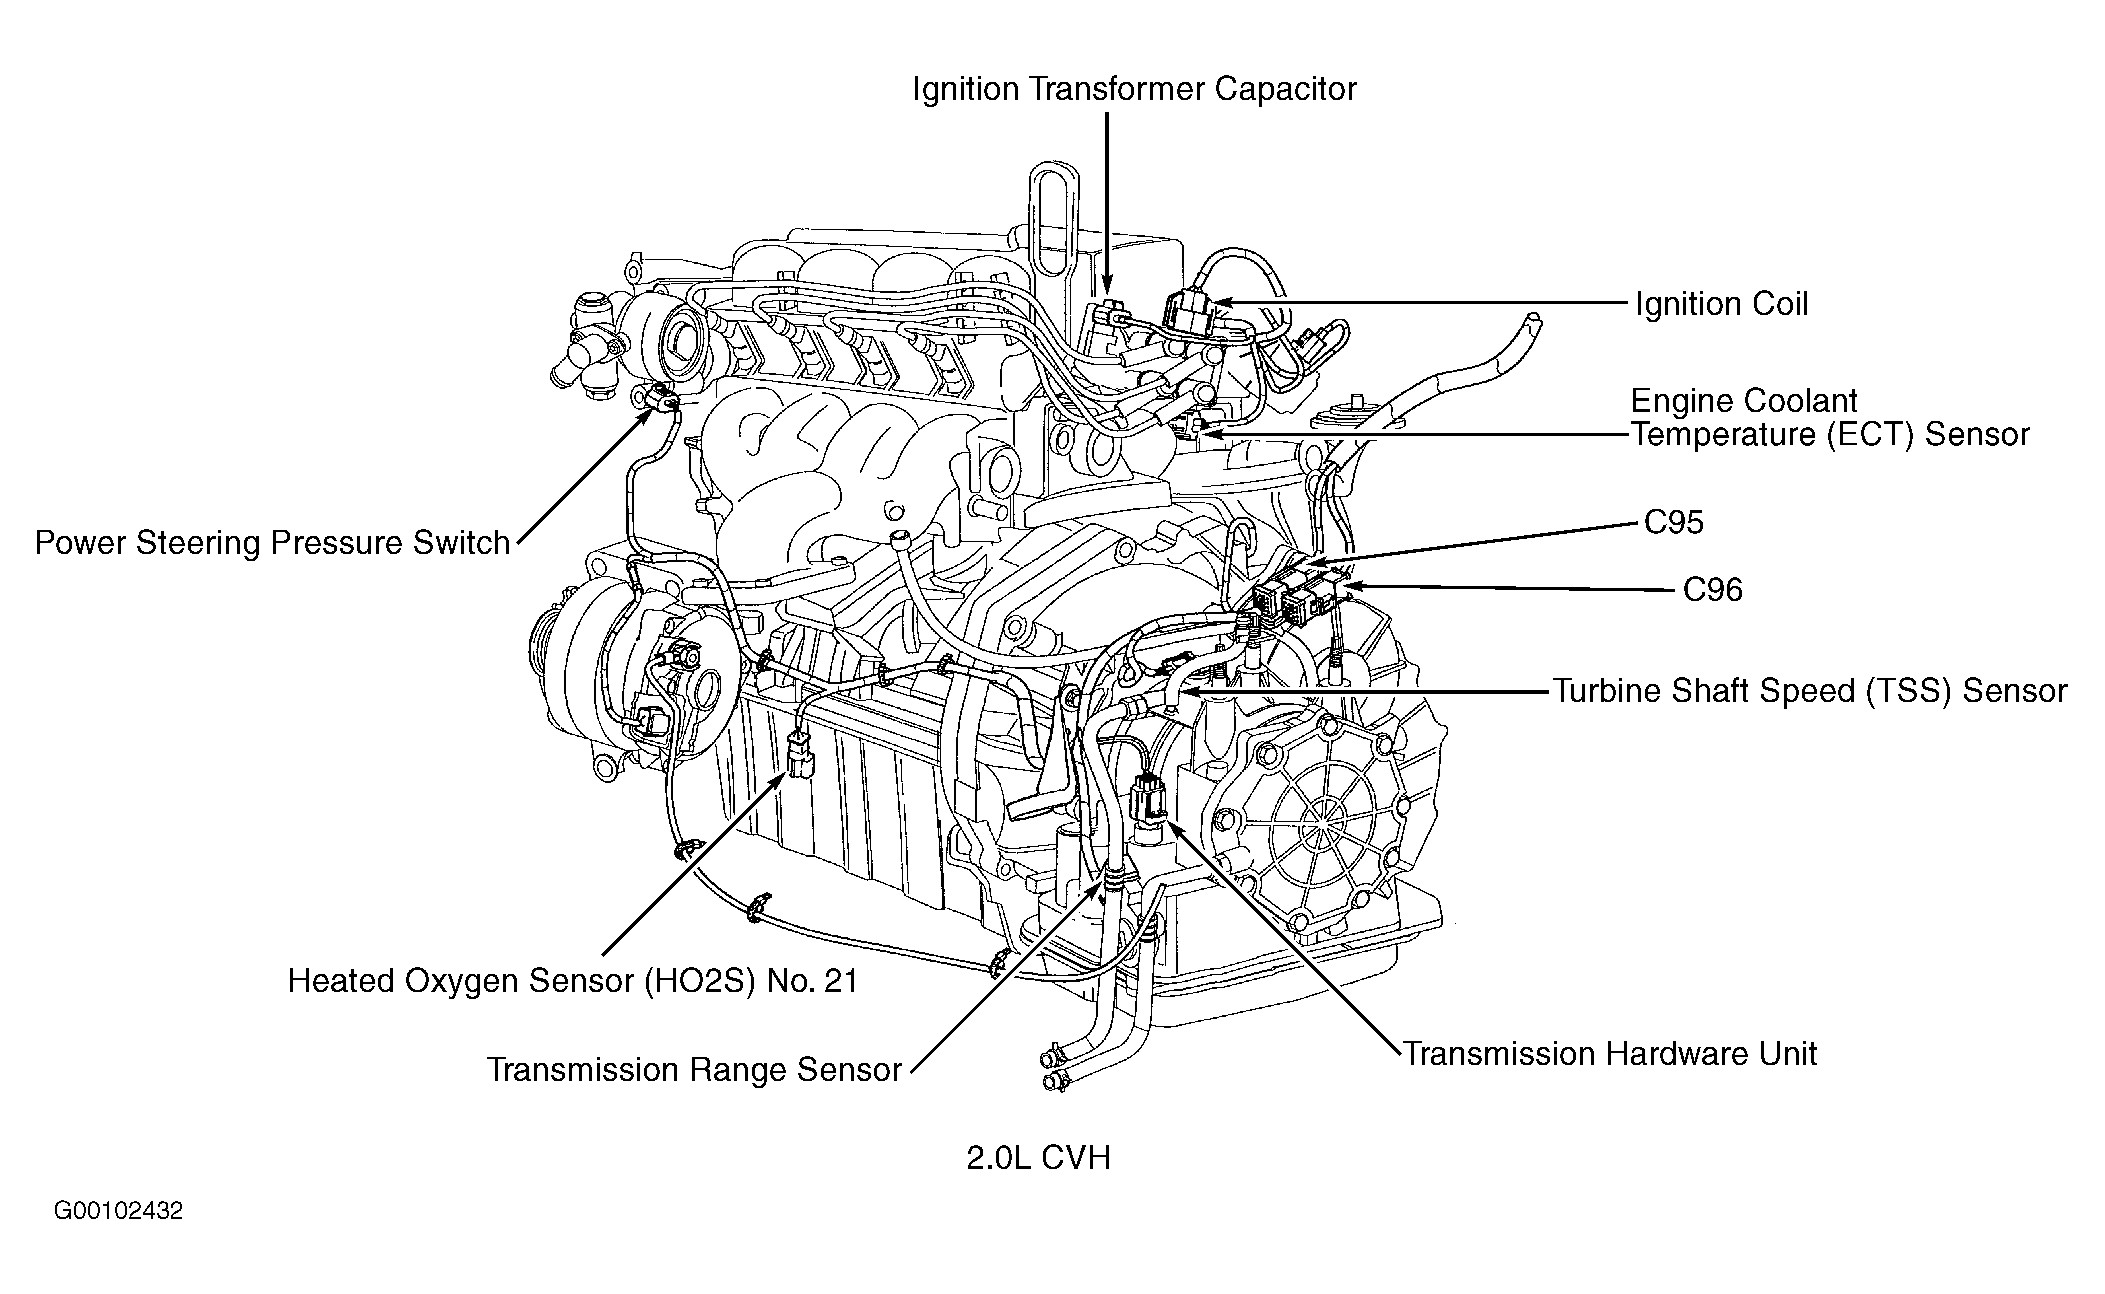 Ford 5 4 Engine Diagram 2 2005 ford Focus Engine Diagram 4 Cyl ford Wiring Diagrams Instructions Of Ford 5 4 Engine Diagram 2